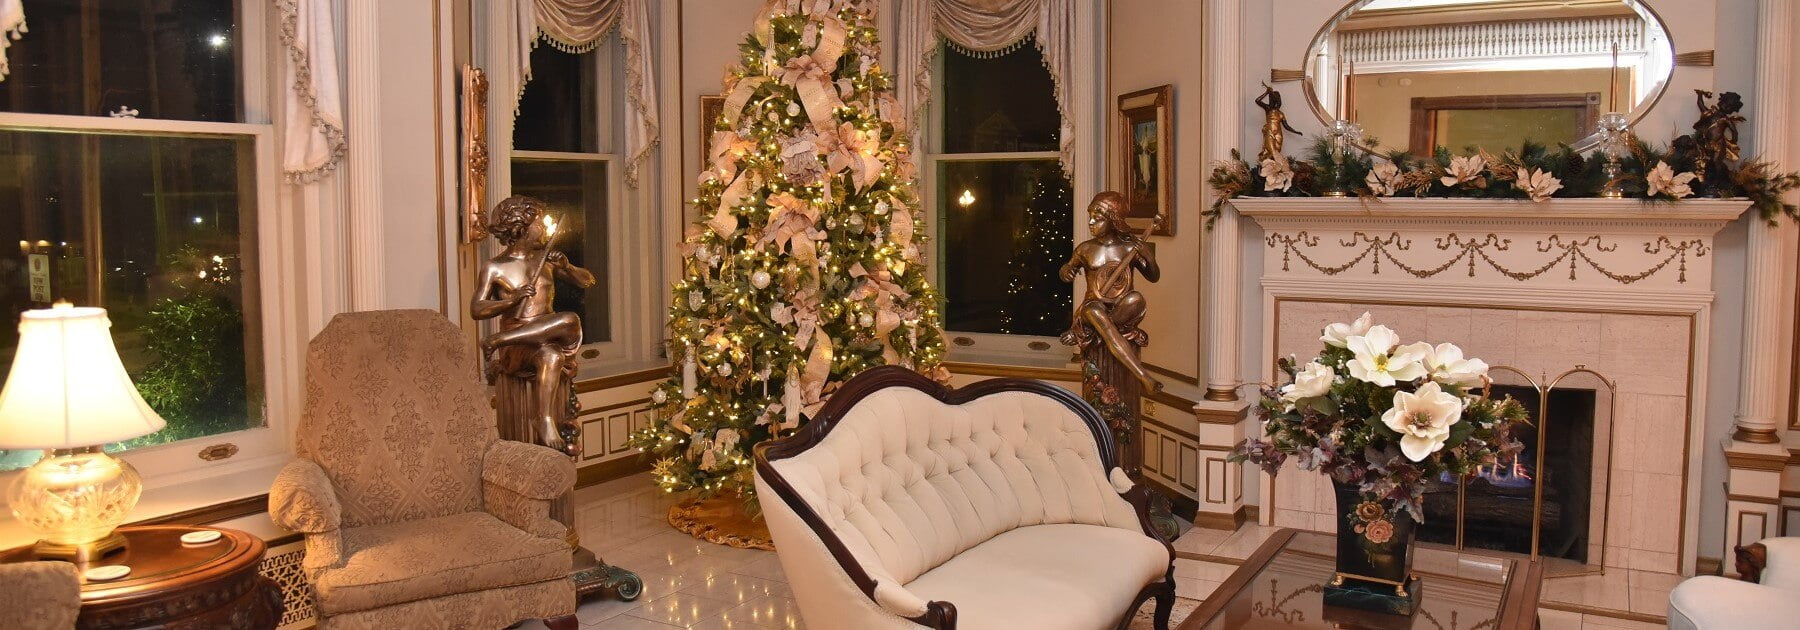 WINTER Buhl Mansion holiday parlour 1800X630 (1)